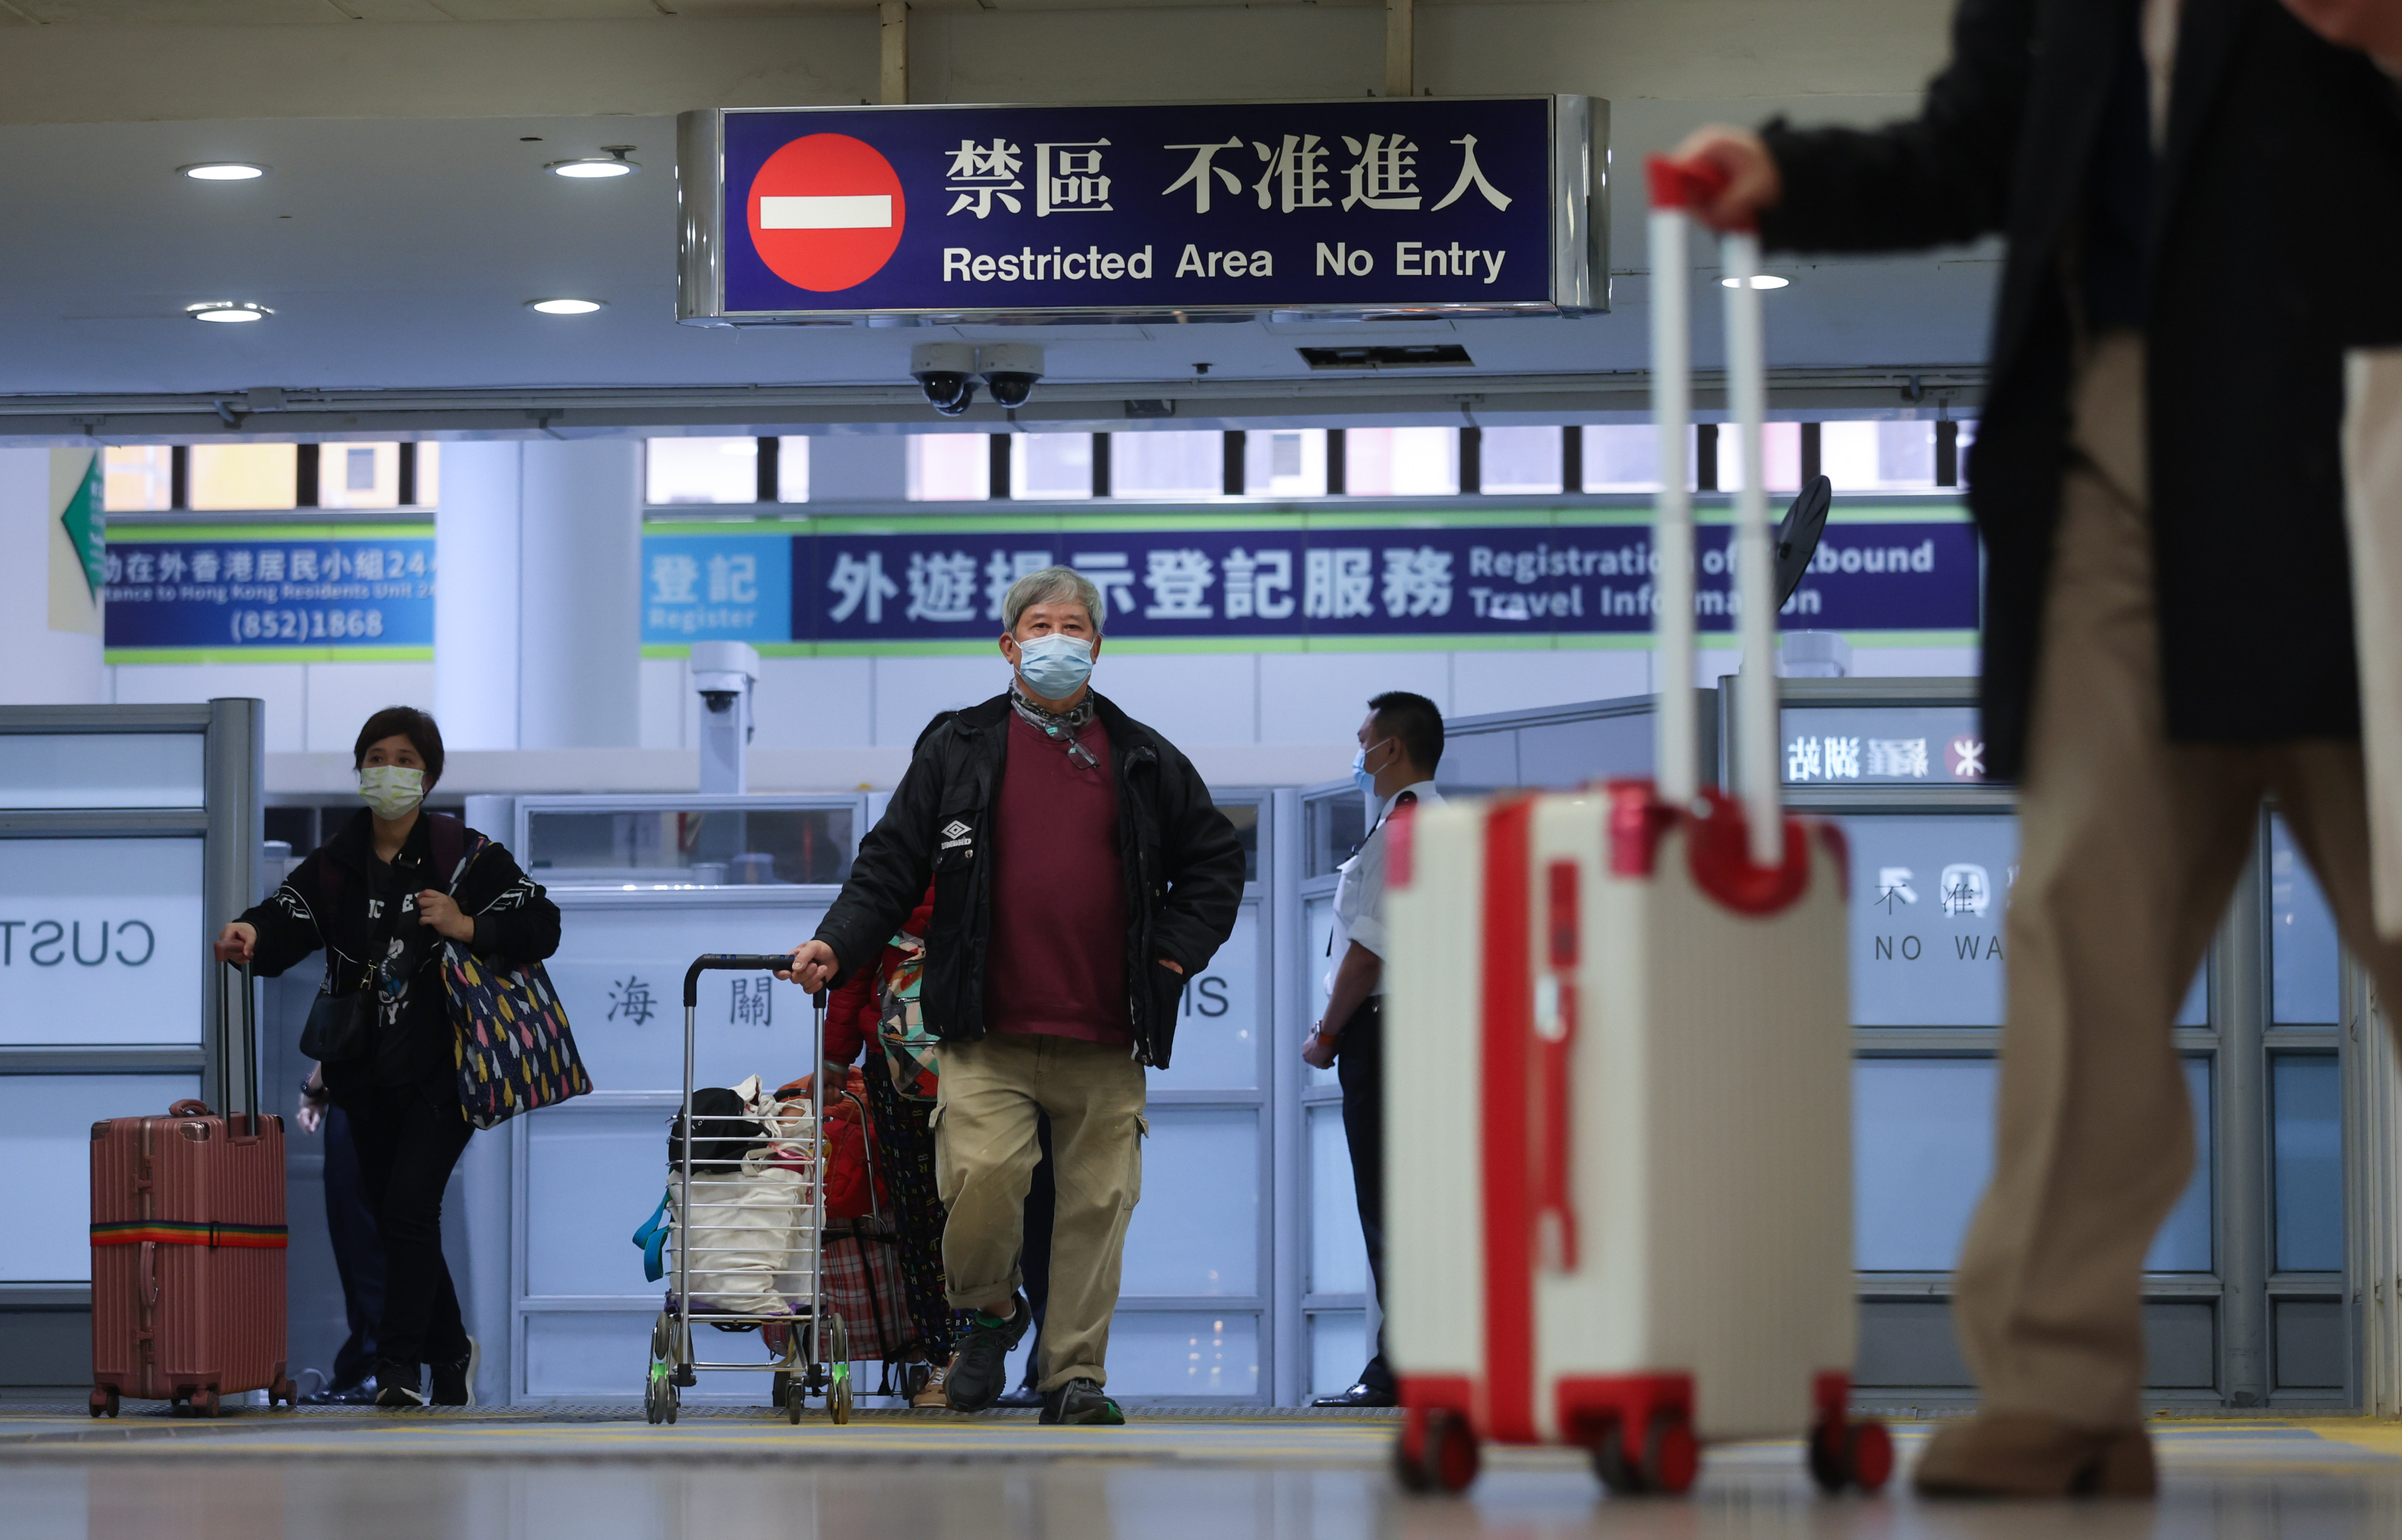 About 7.54 million passengers will enter Hong Kong through land boundary control points, the Immigration Department says. Photo: Yik Yeung-man